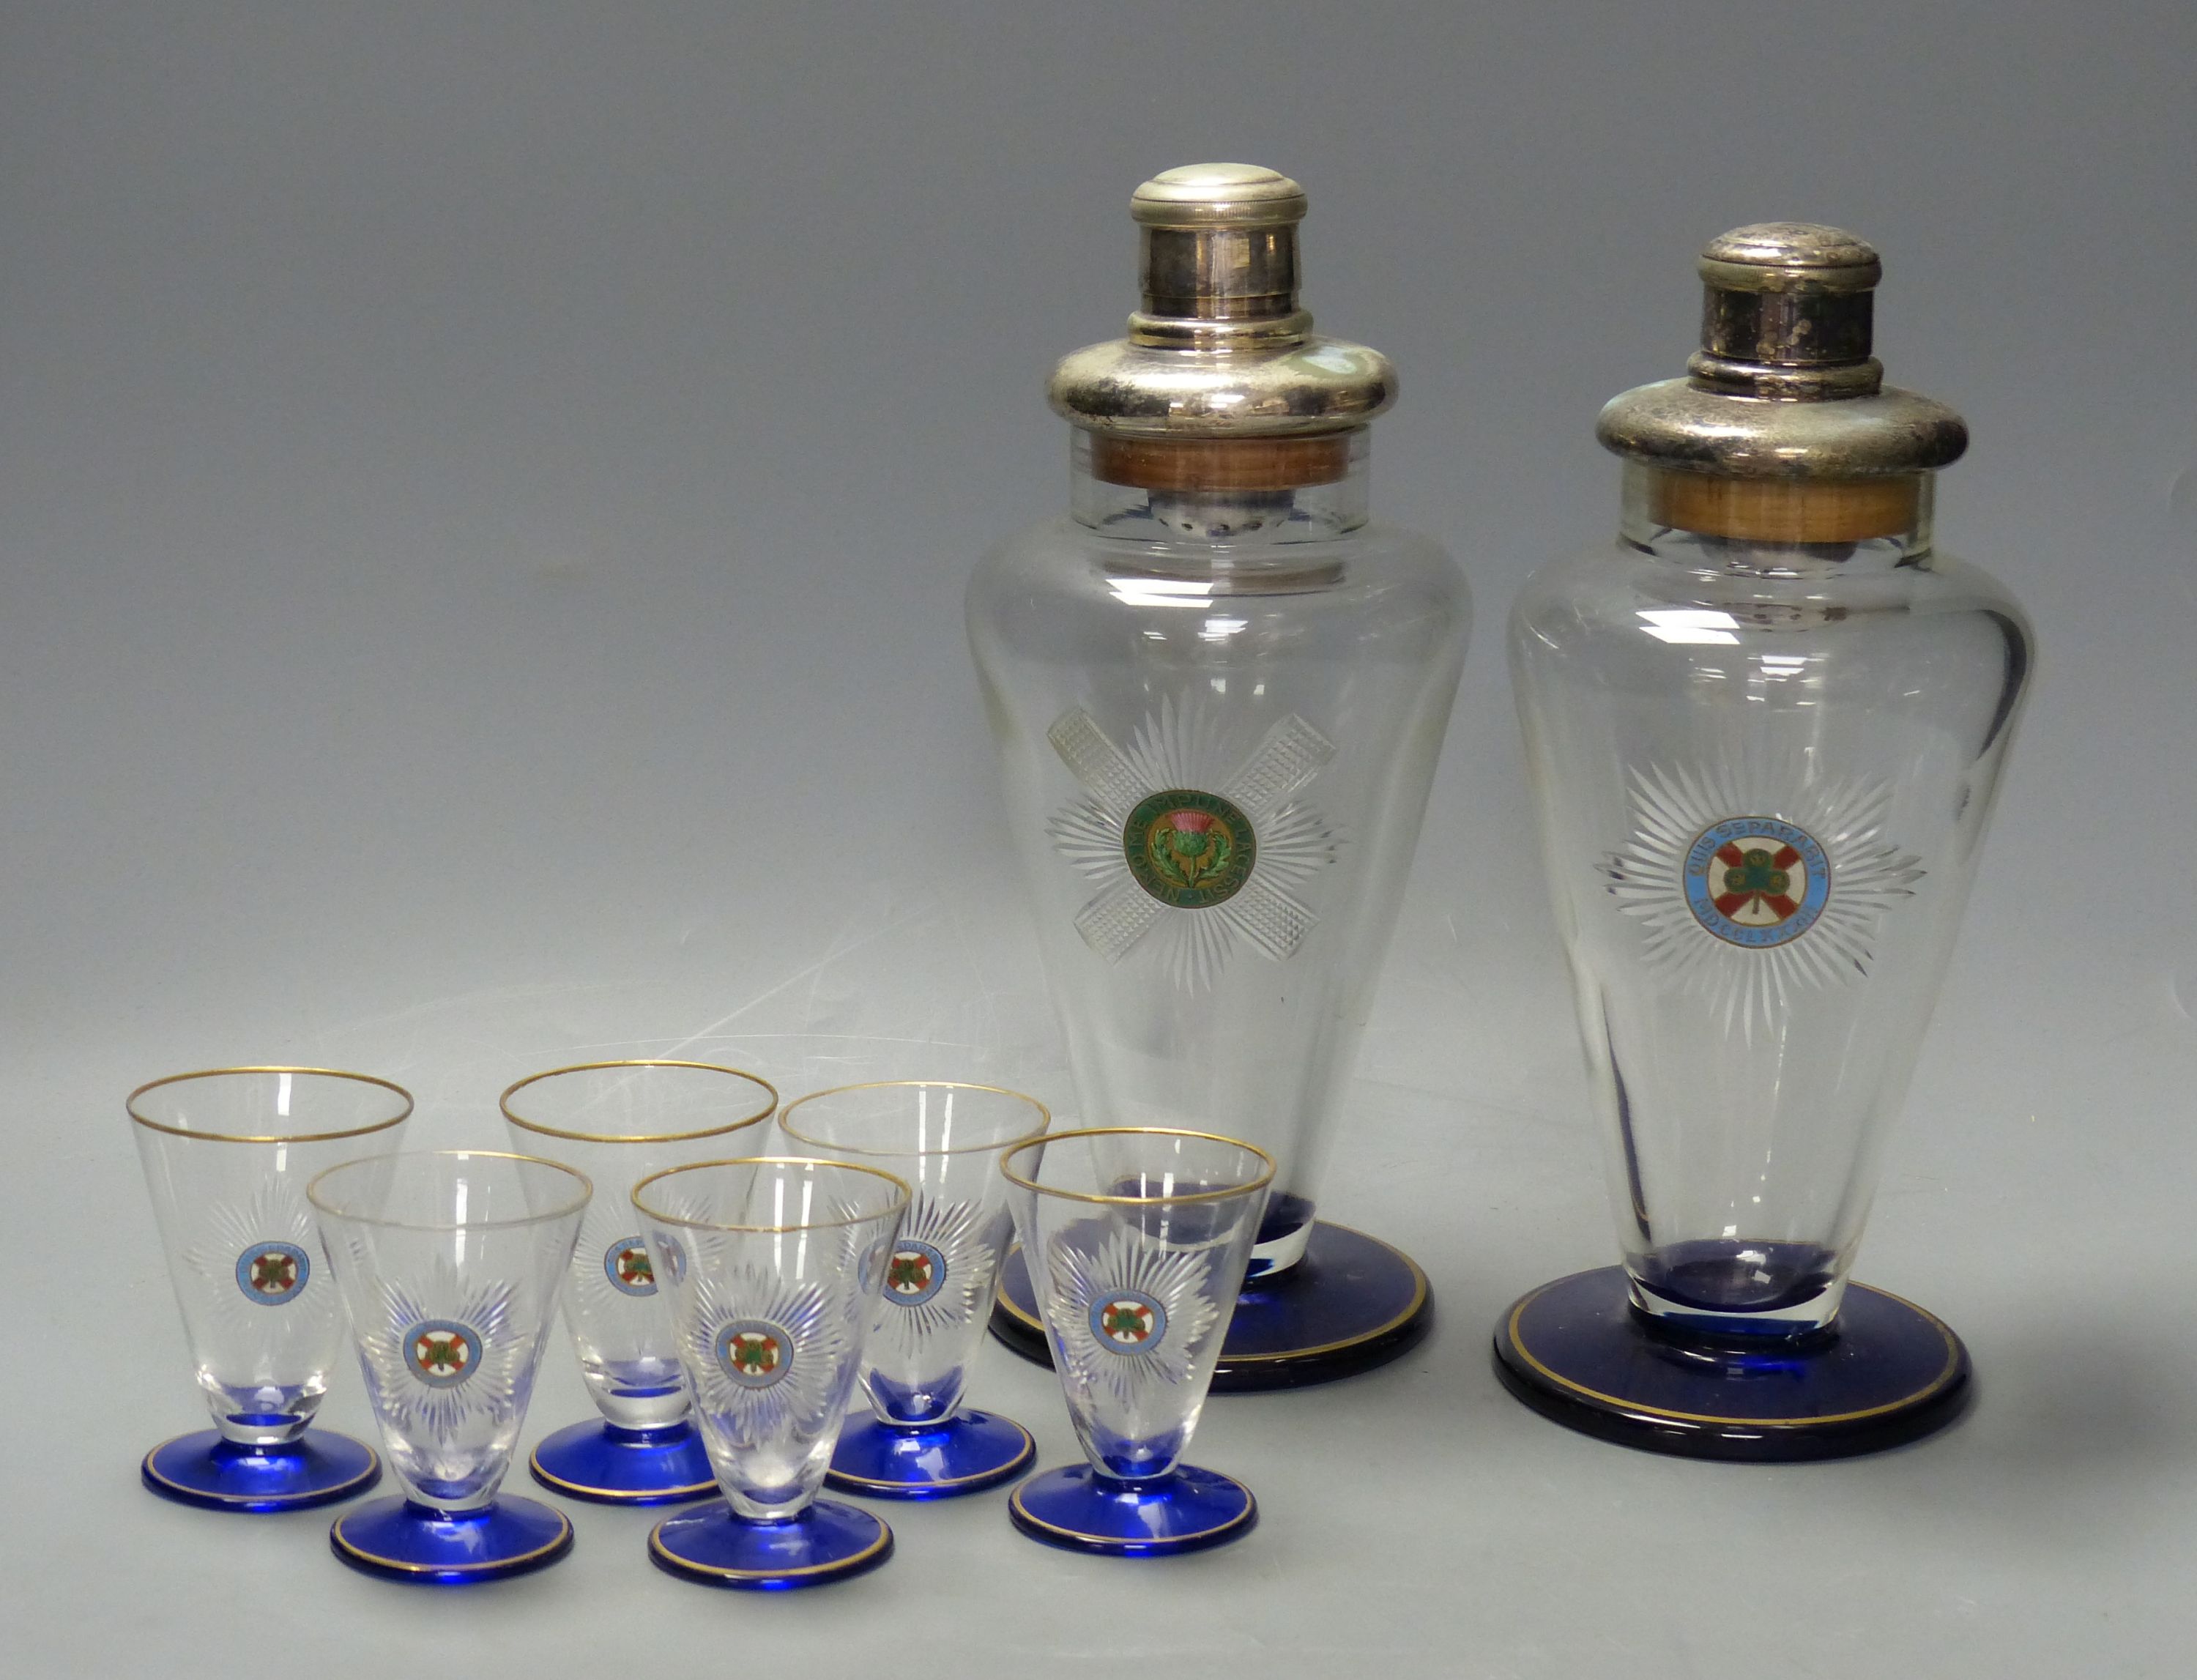 A pair of Art Deco cobalt blue and gilt-mounted tapered glass cocktail shakers, c.1920, enamelled with Black Watch and 4th Royal Irish Dragoon Guards mottos and six matching glasses